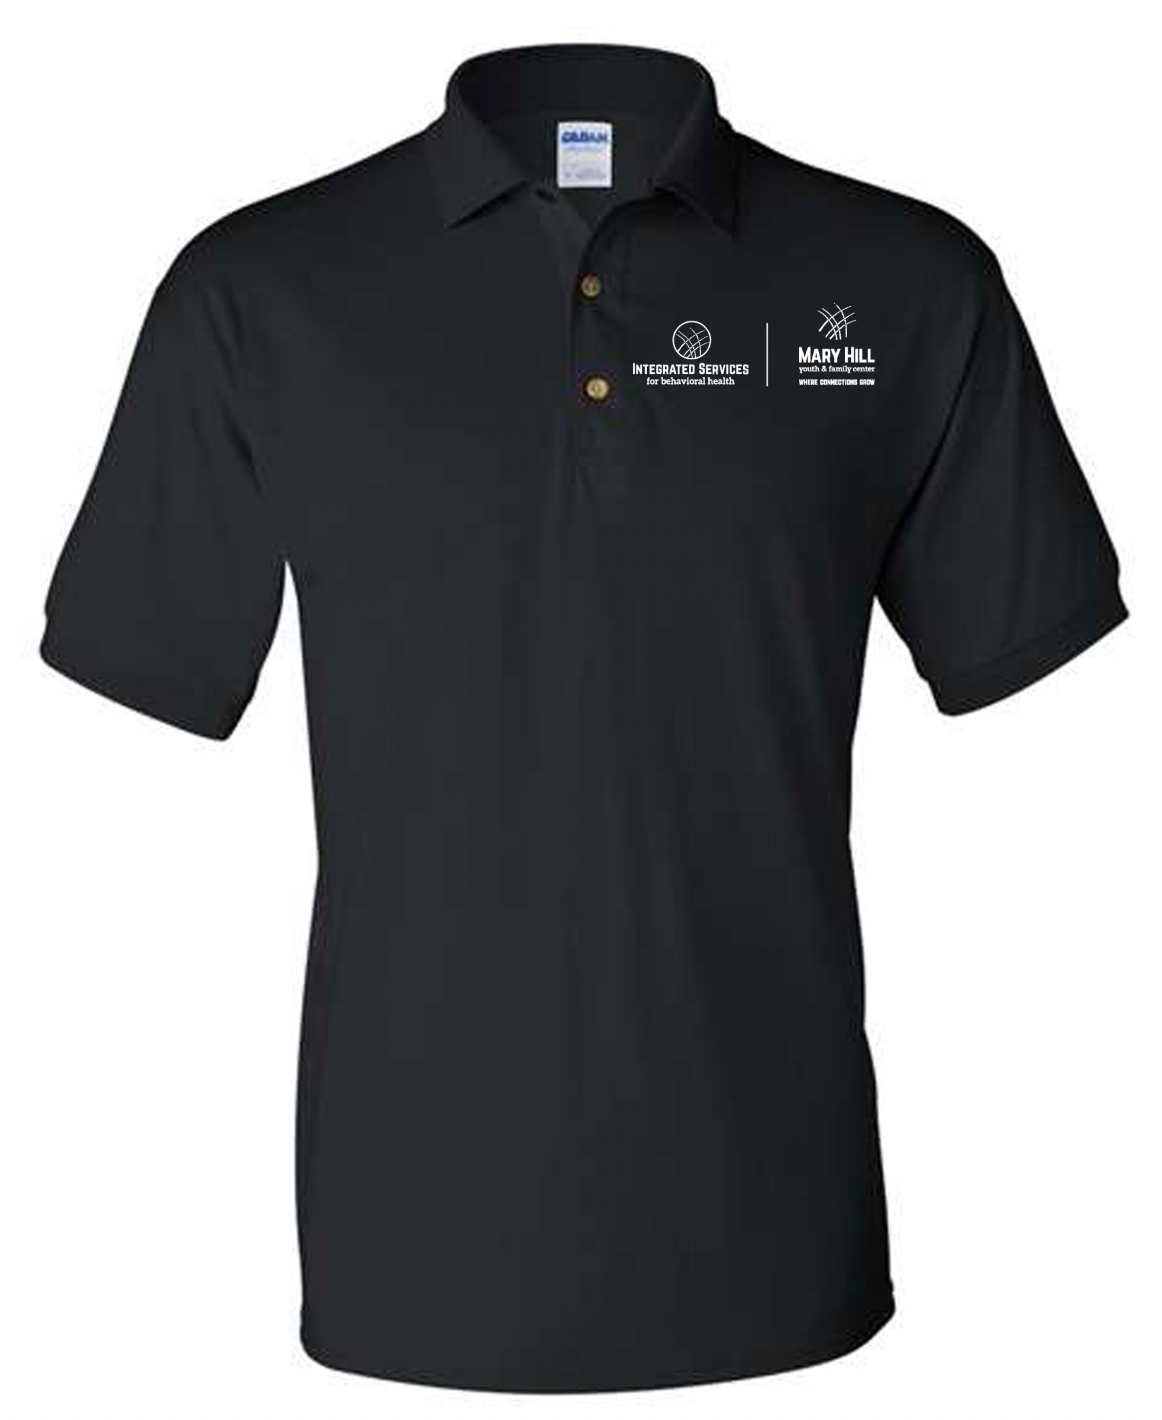 Mary Hill - Integrated Services Cotton Polo